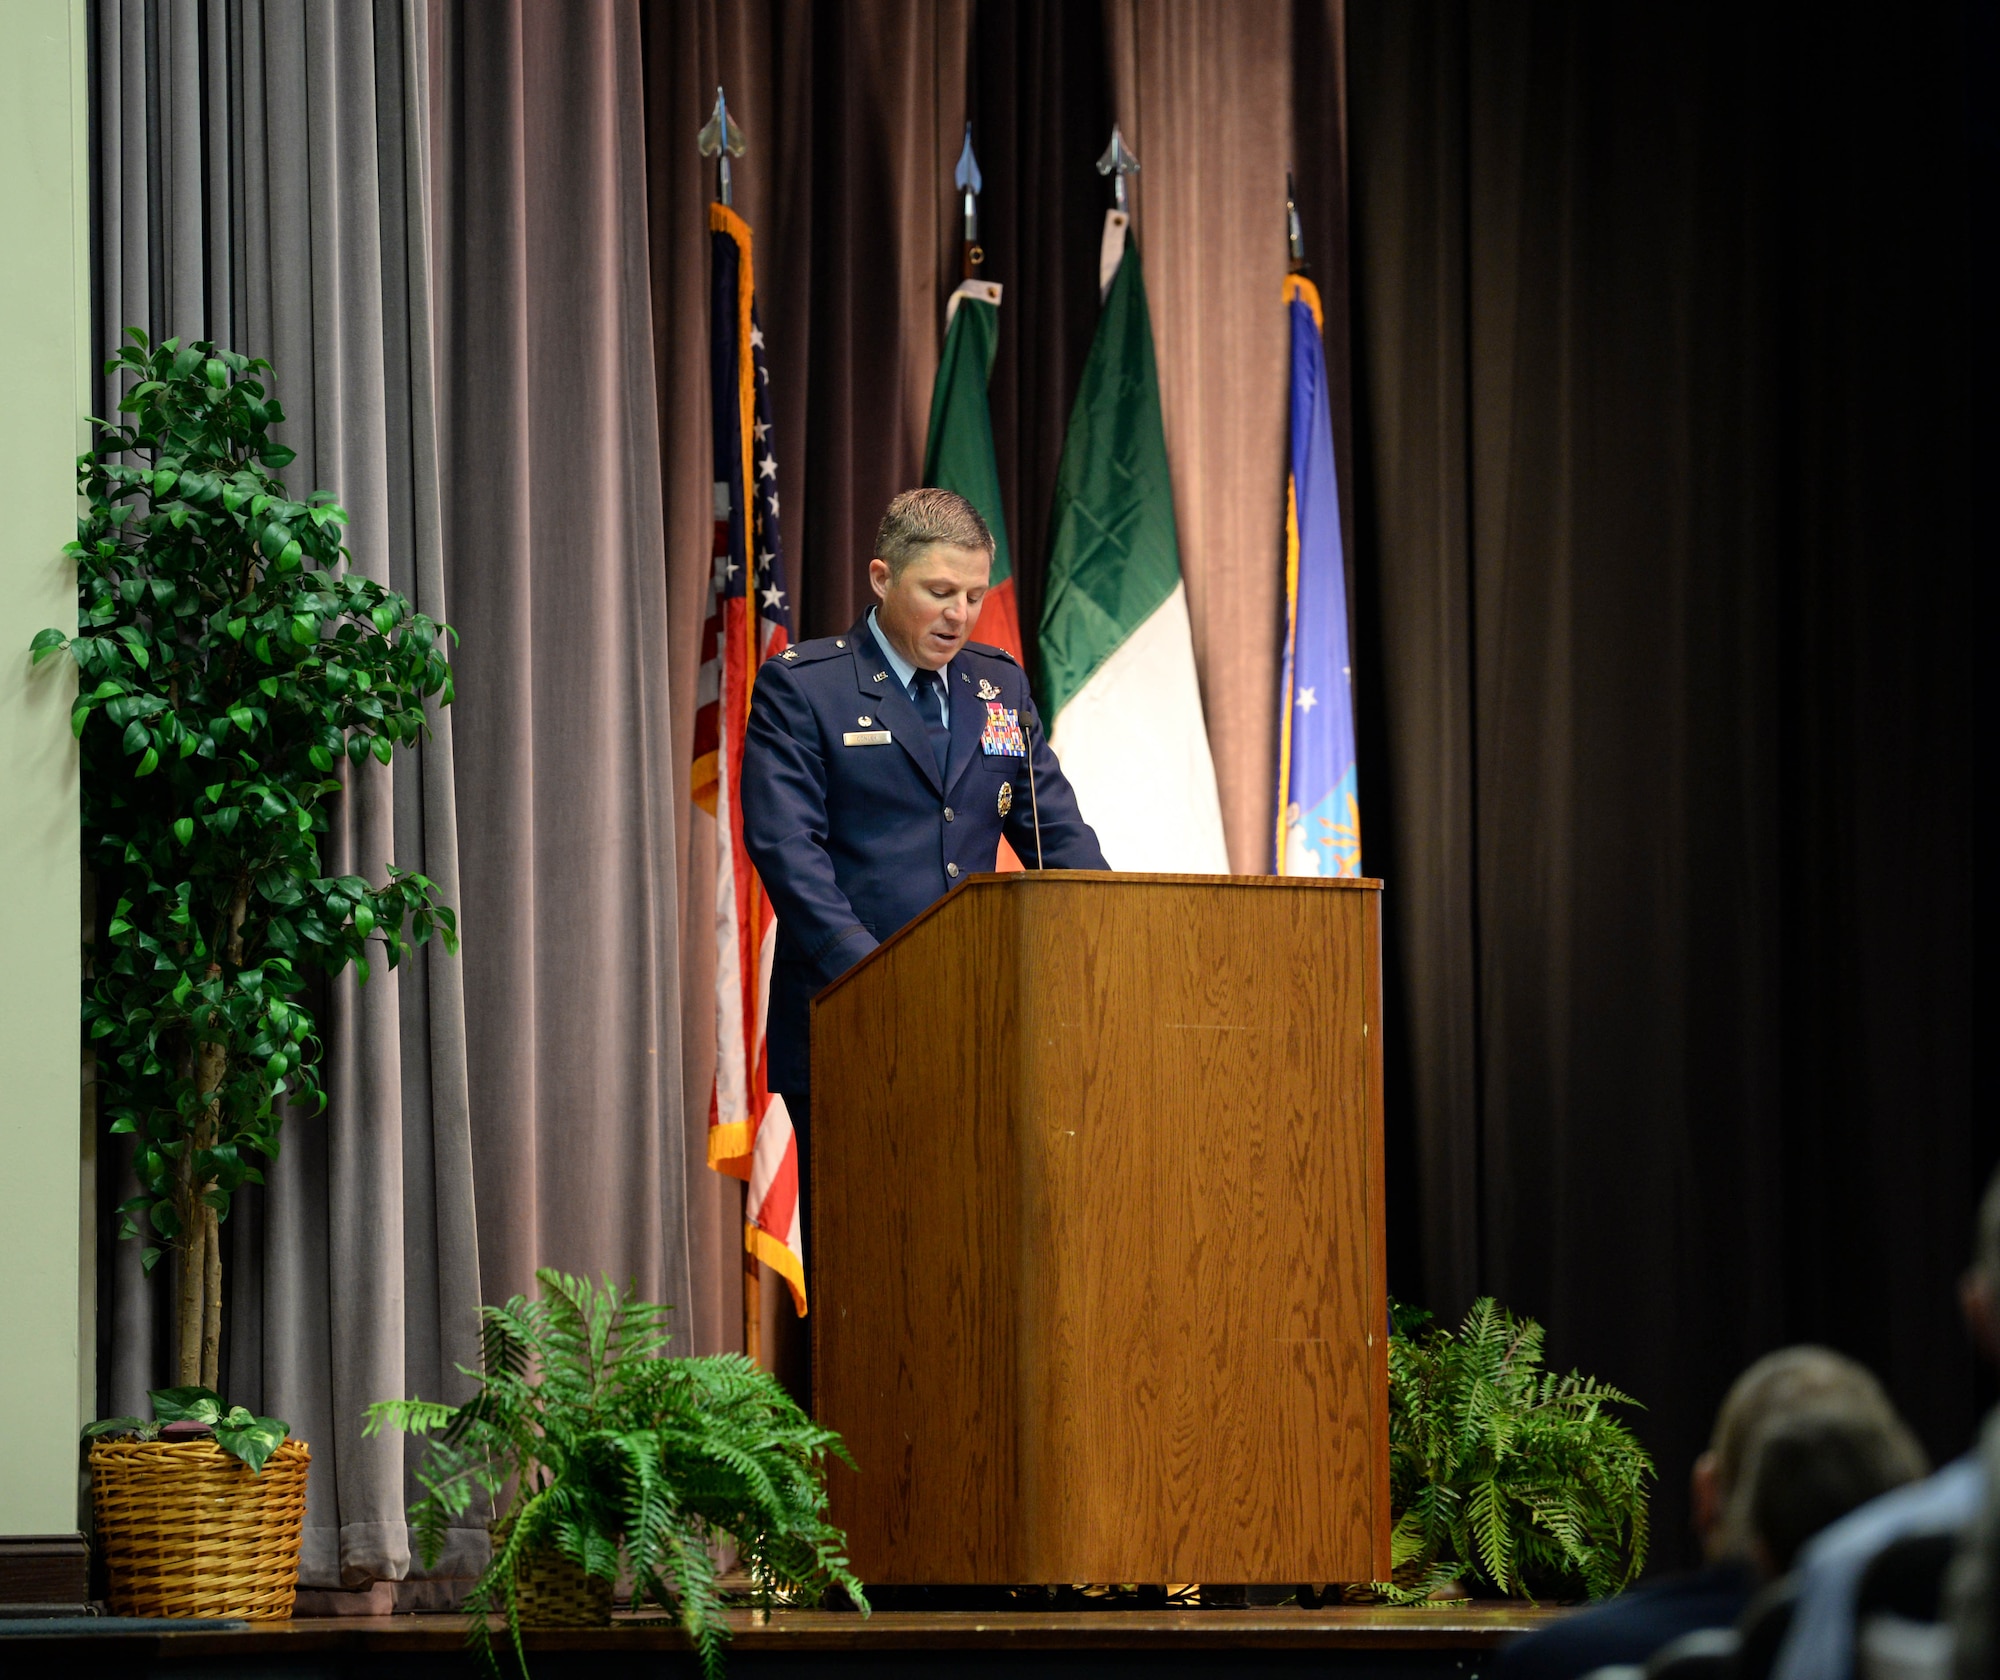 Col. Michael Conley, 1st Special Operations Wing commander, gives a speech at Special Undergraduate Pilot Training Class’s 19-21/22 graduation ceremony Aug. 16, 2019, at Columbus Air Force Base, Miss. Conley is also a pilot and has 2,400 flight hours. (U.S. Air Force photo by Airman Davis Donaldson)